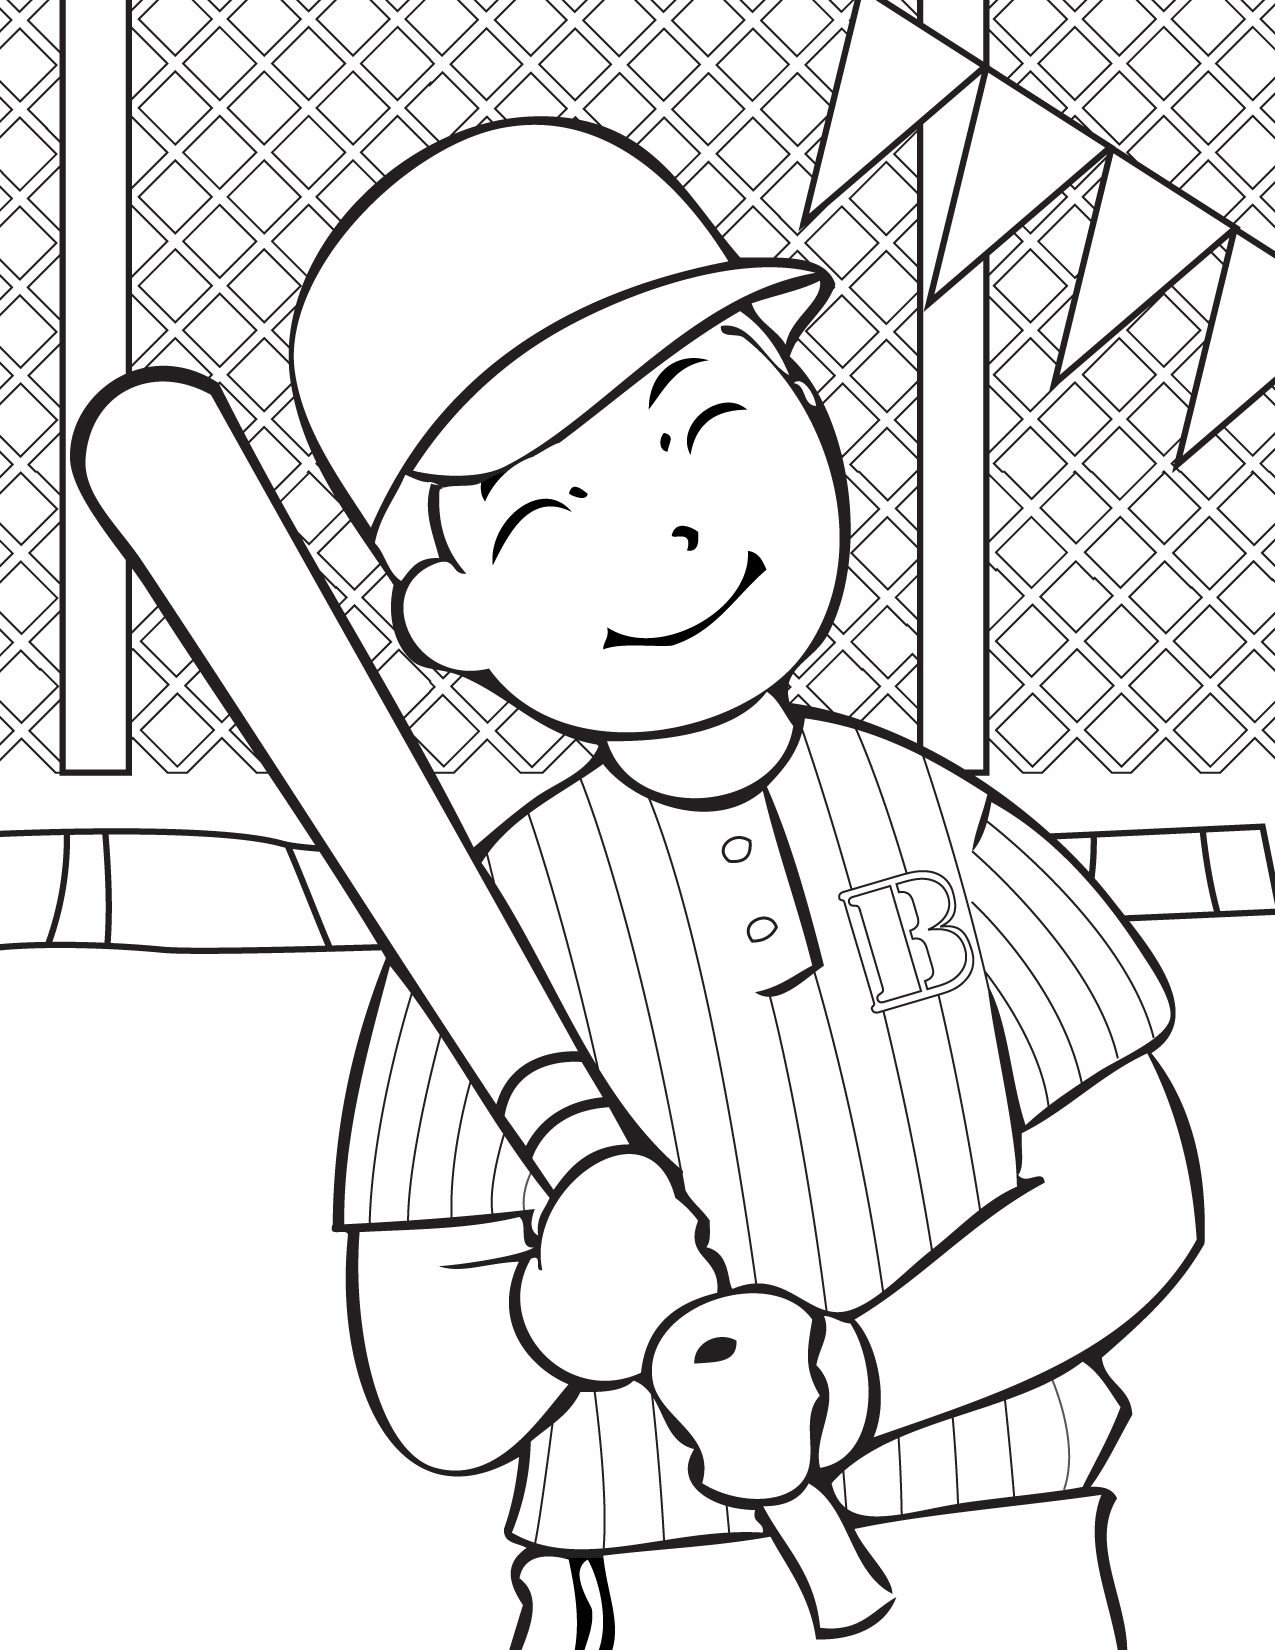 Free Printable Baseball Coloring Pages for Kids Best